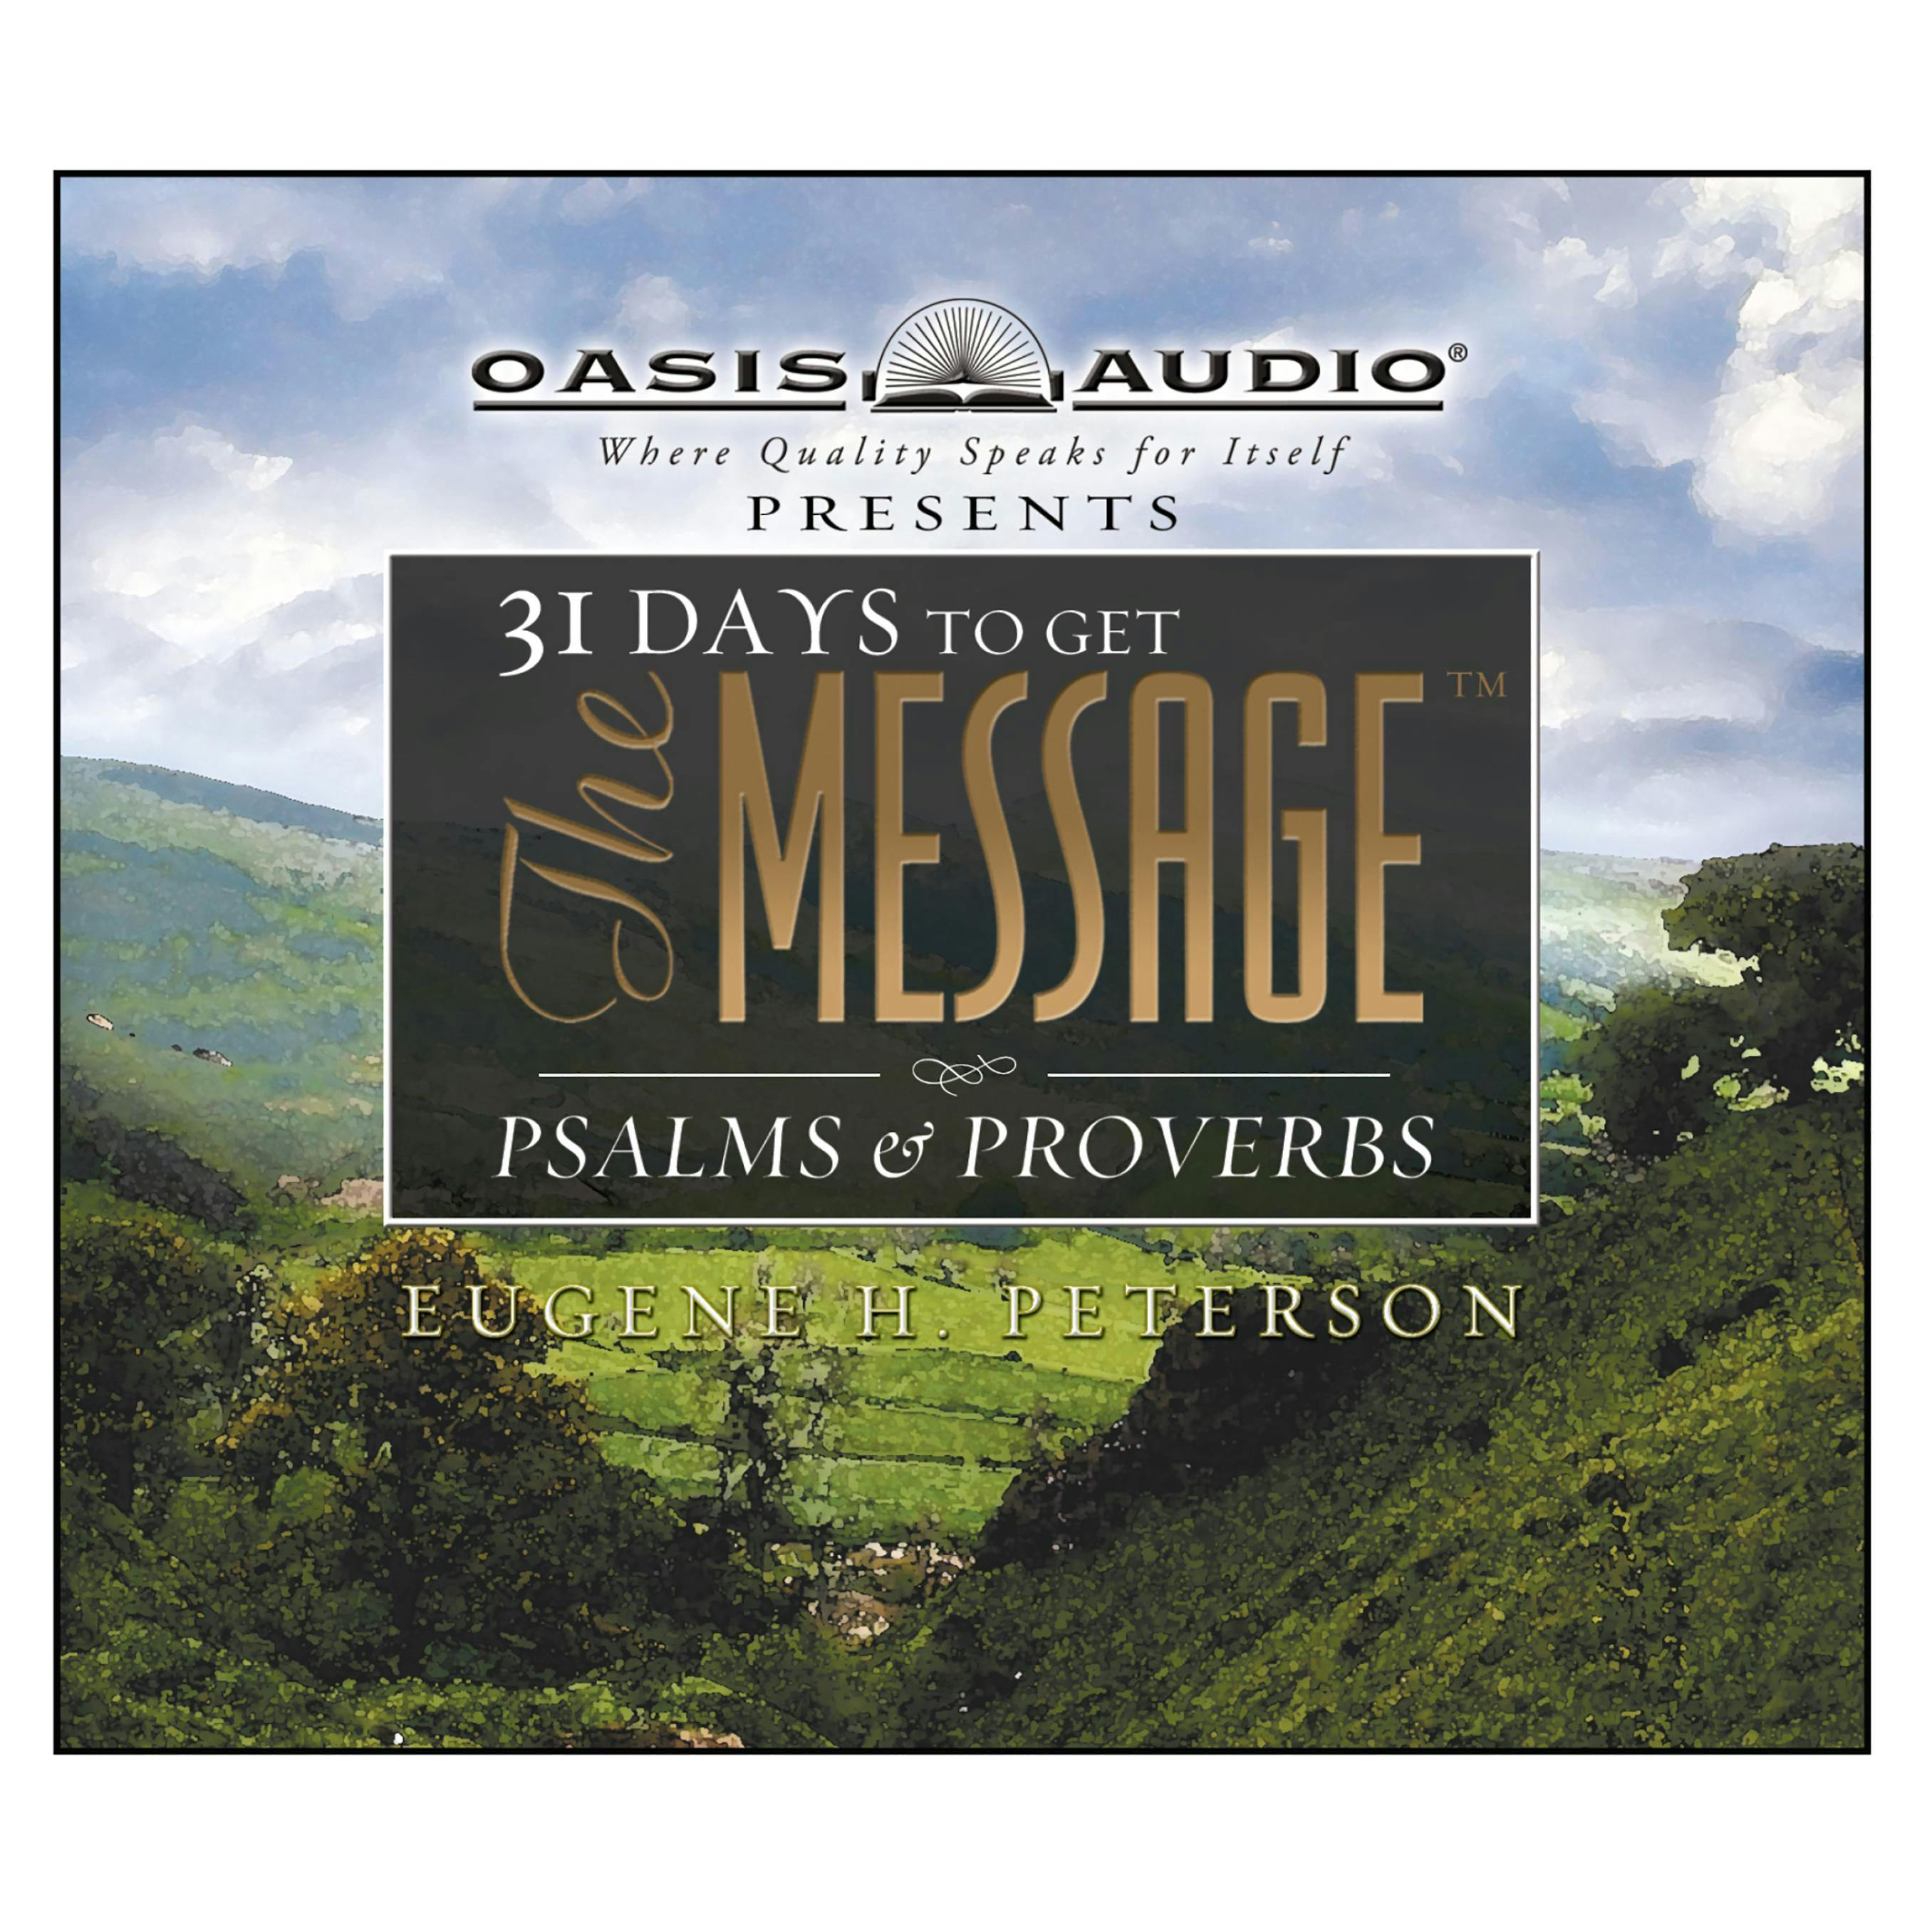 31 Days to Get The Message: Psalms and Proverbs - Eugene H Peterson